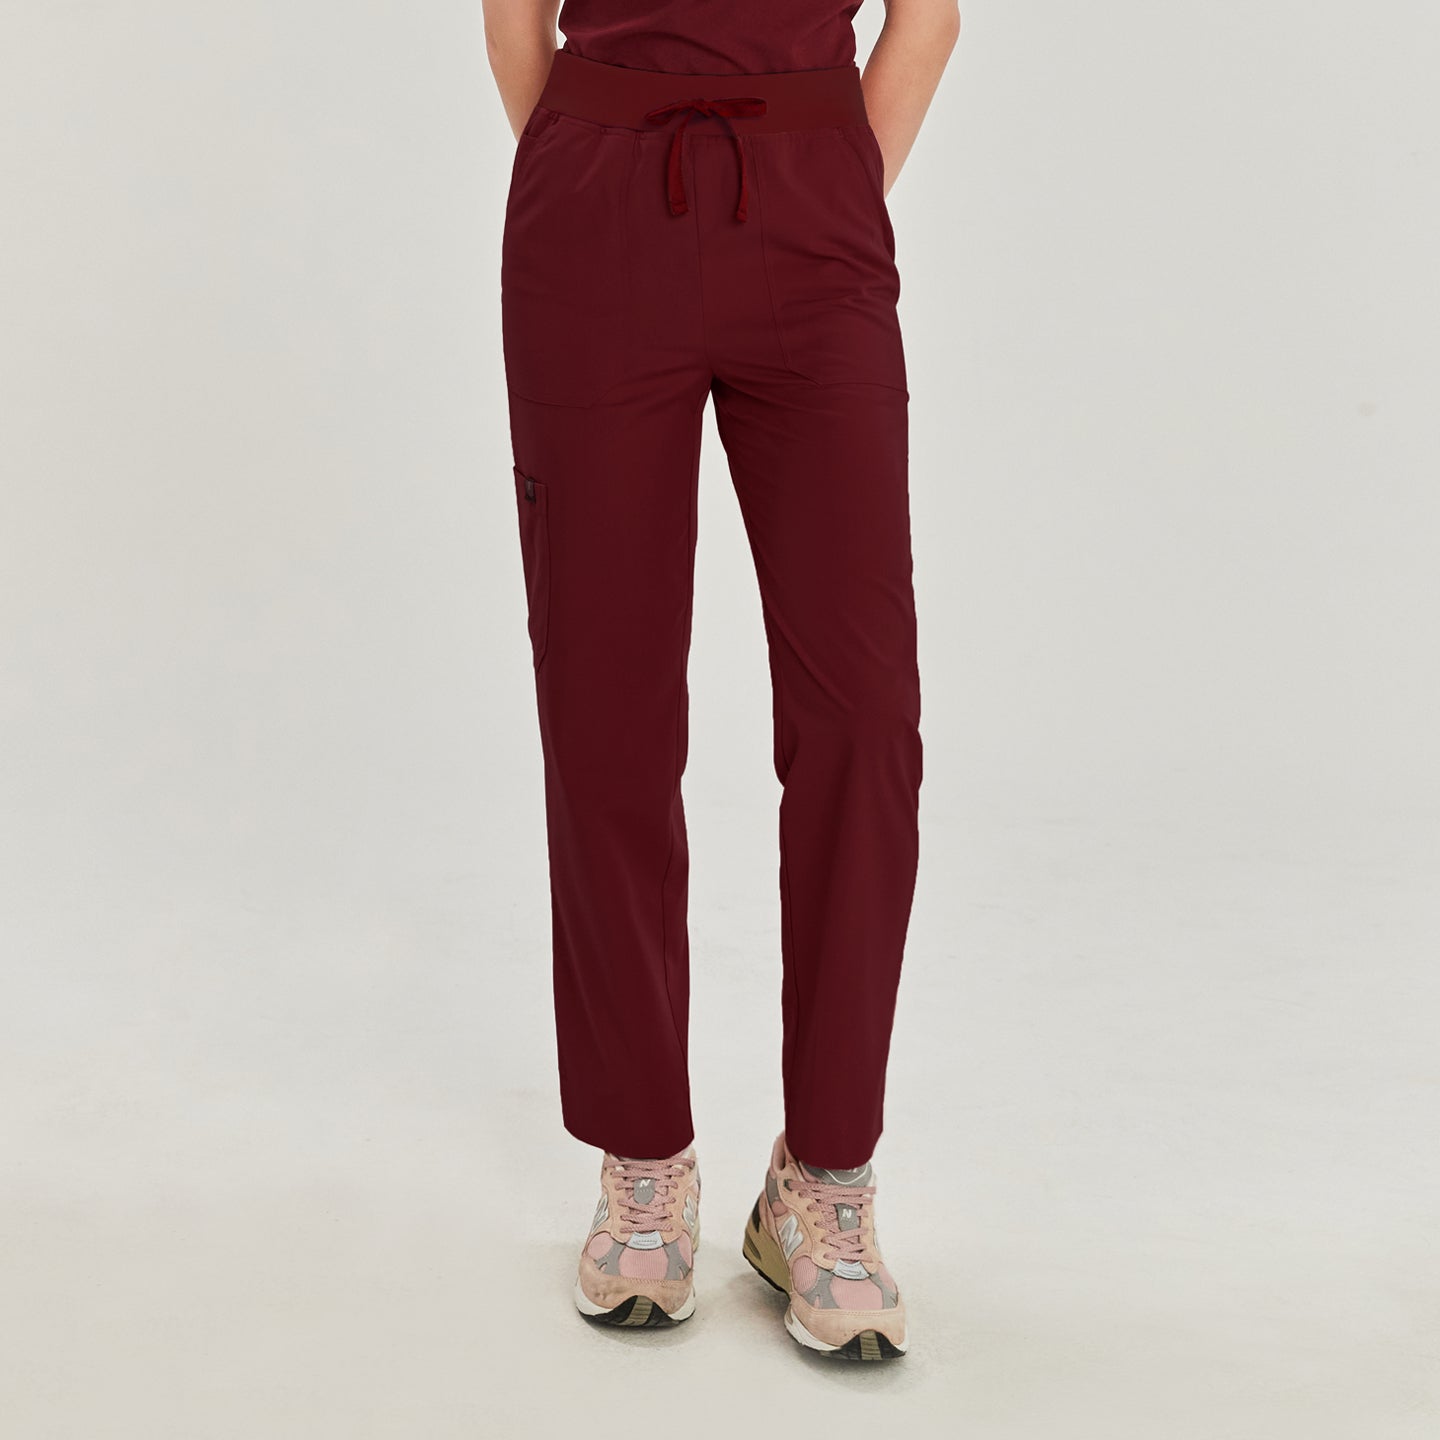 Front view of a woman wearing burgundy zipper slit scrub pants with a drawstring waist and side pocket, paired with pink sneakers,Burgundy